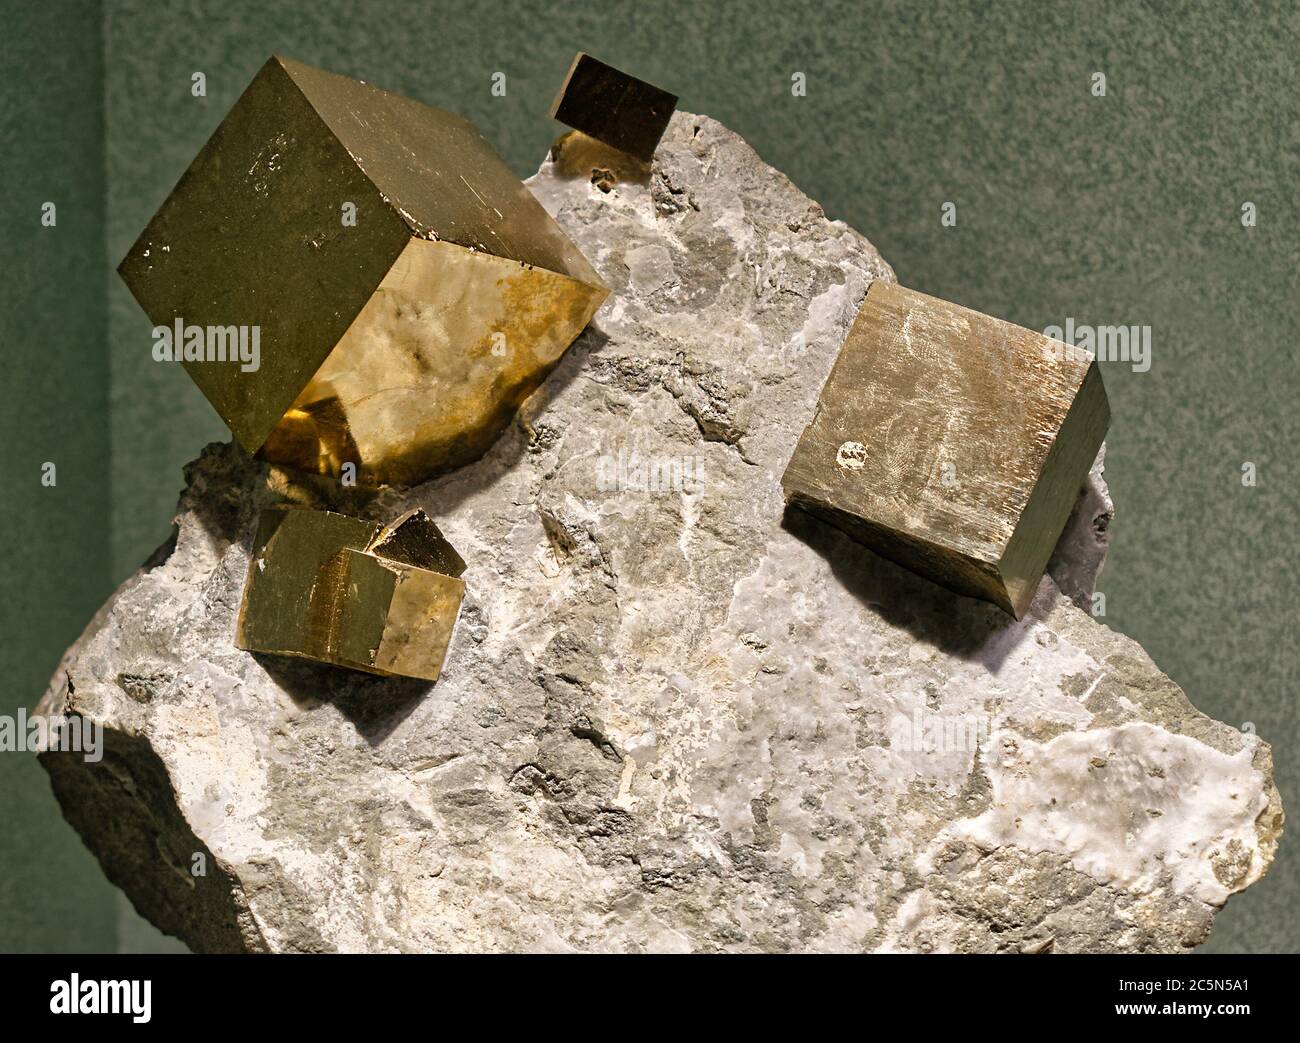 Pyrite cubic crystals embedded in a matrix Stock Photo